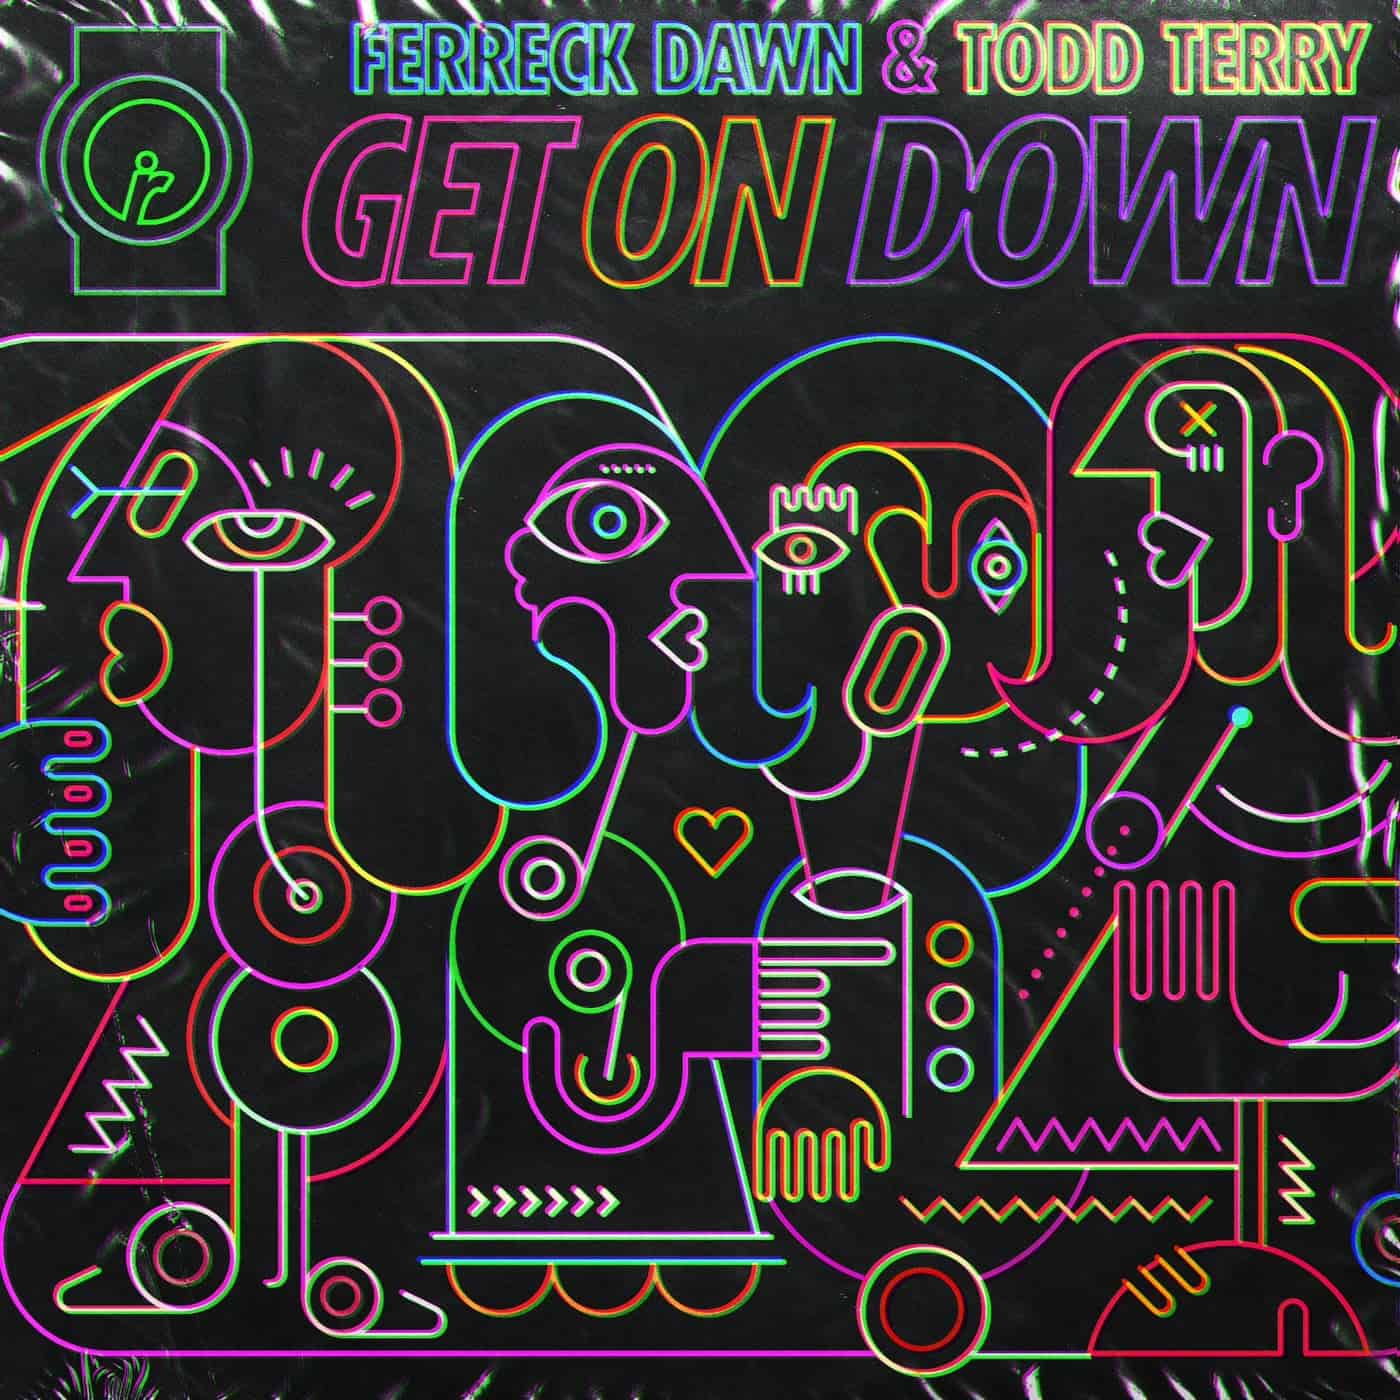 image cover: Todd Terry, Ferreck Dawn - Get On Down / IR0218B